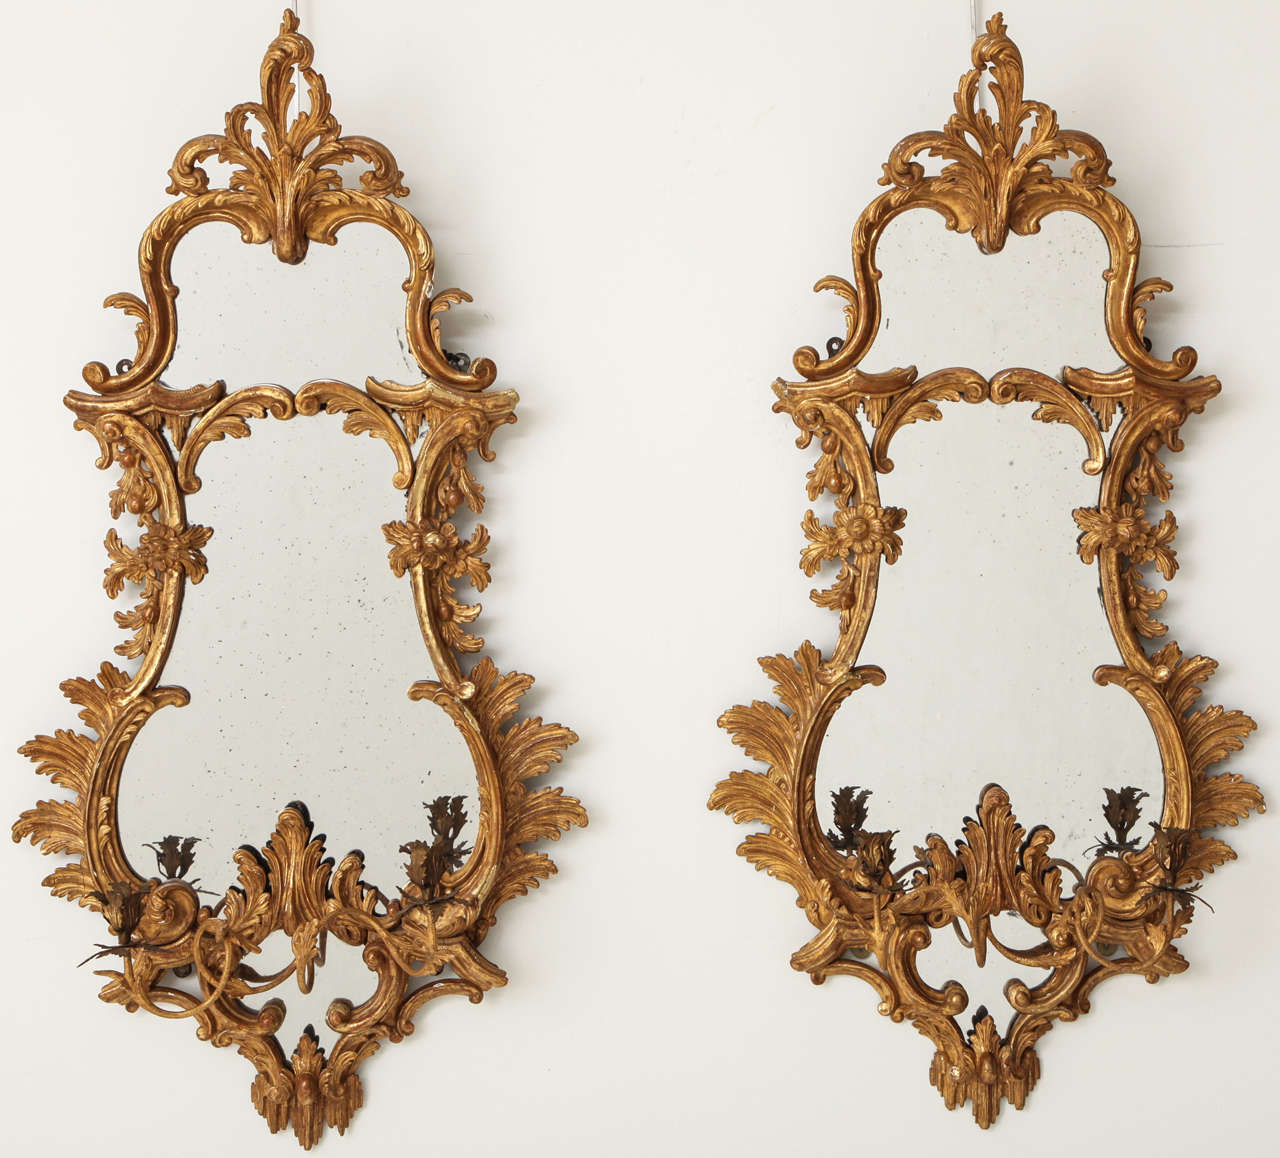 A pair of George III style carved giltwood girandole mirrors in the Rococo taste, each cartouche-form plate surmounted by a leafy crest above a  C-scroll and foliate garland border, the base centering a pair of spiraling vine candlearms.